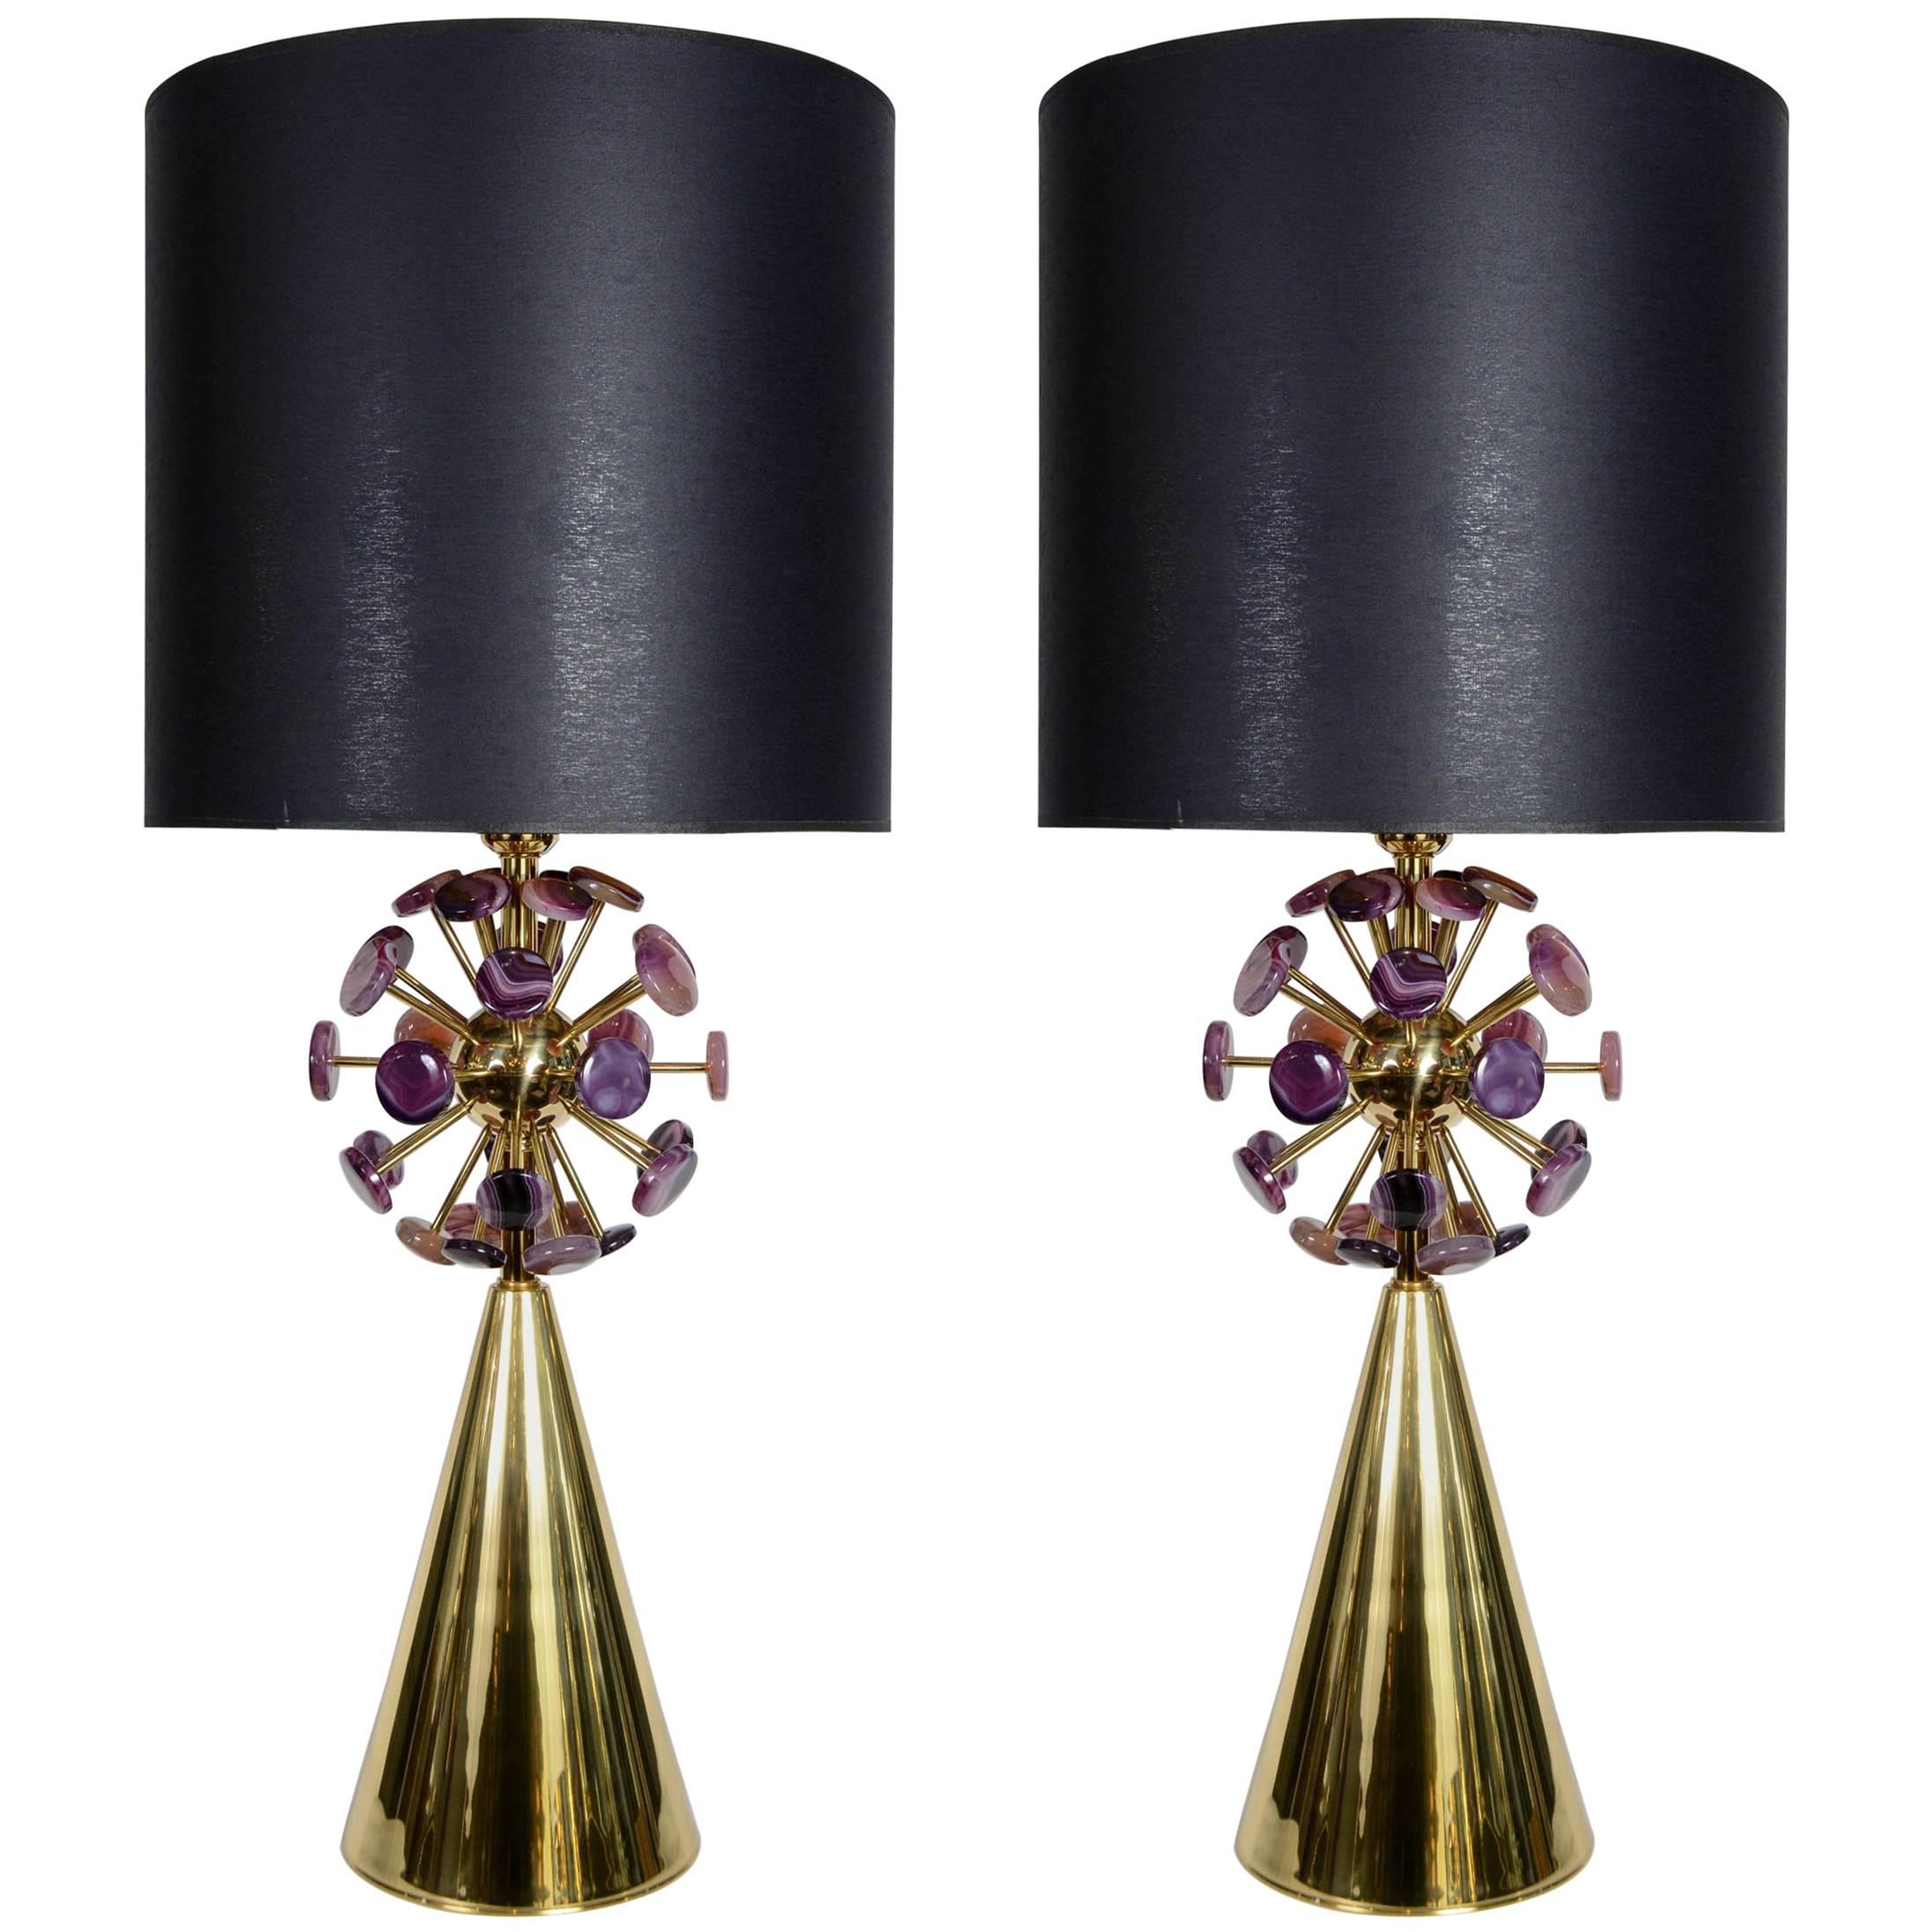 Pair of Lamps with Agates Stones by Juanluca Fontana